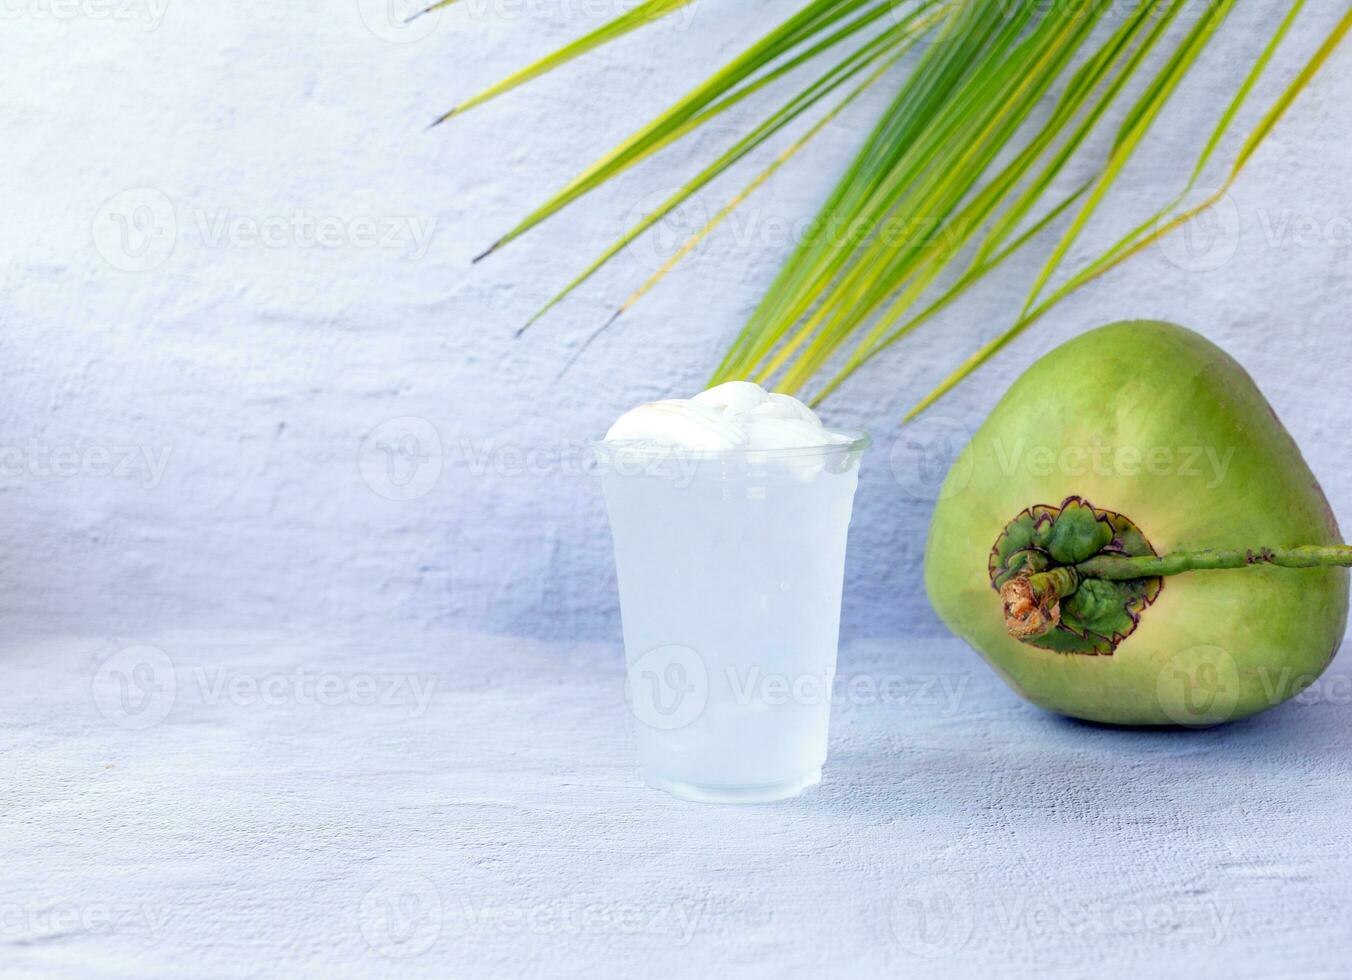 Ice coconut water drink in a plastic glass and coconut on white background photo